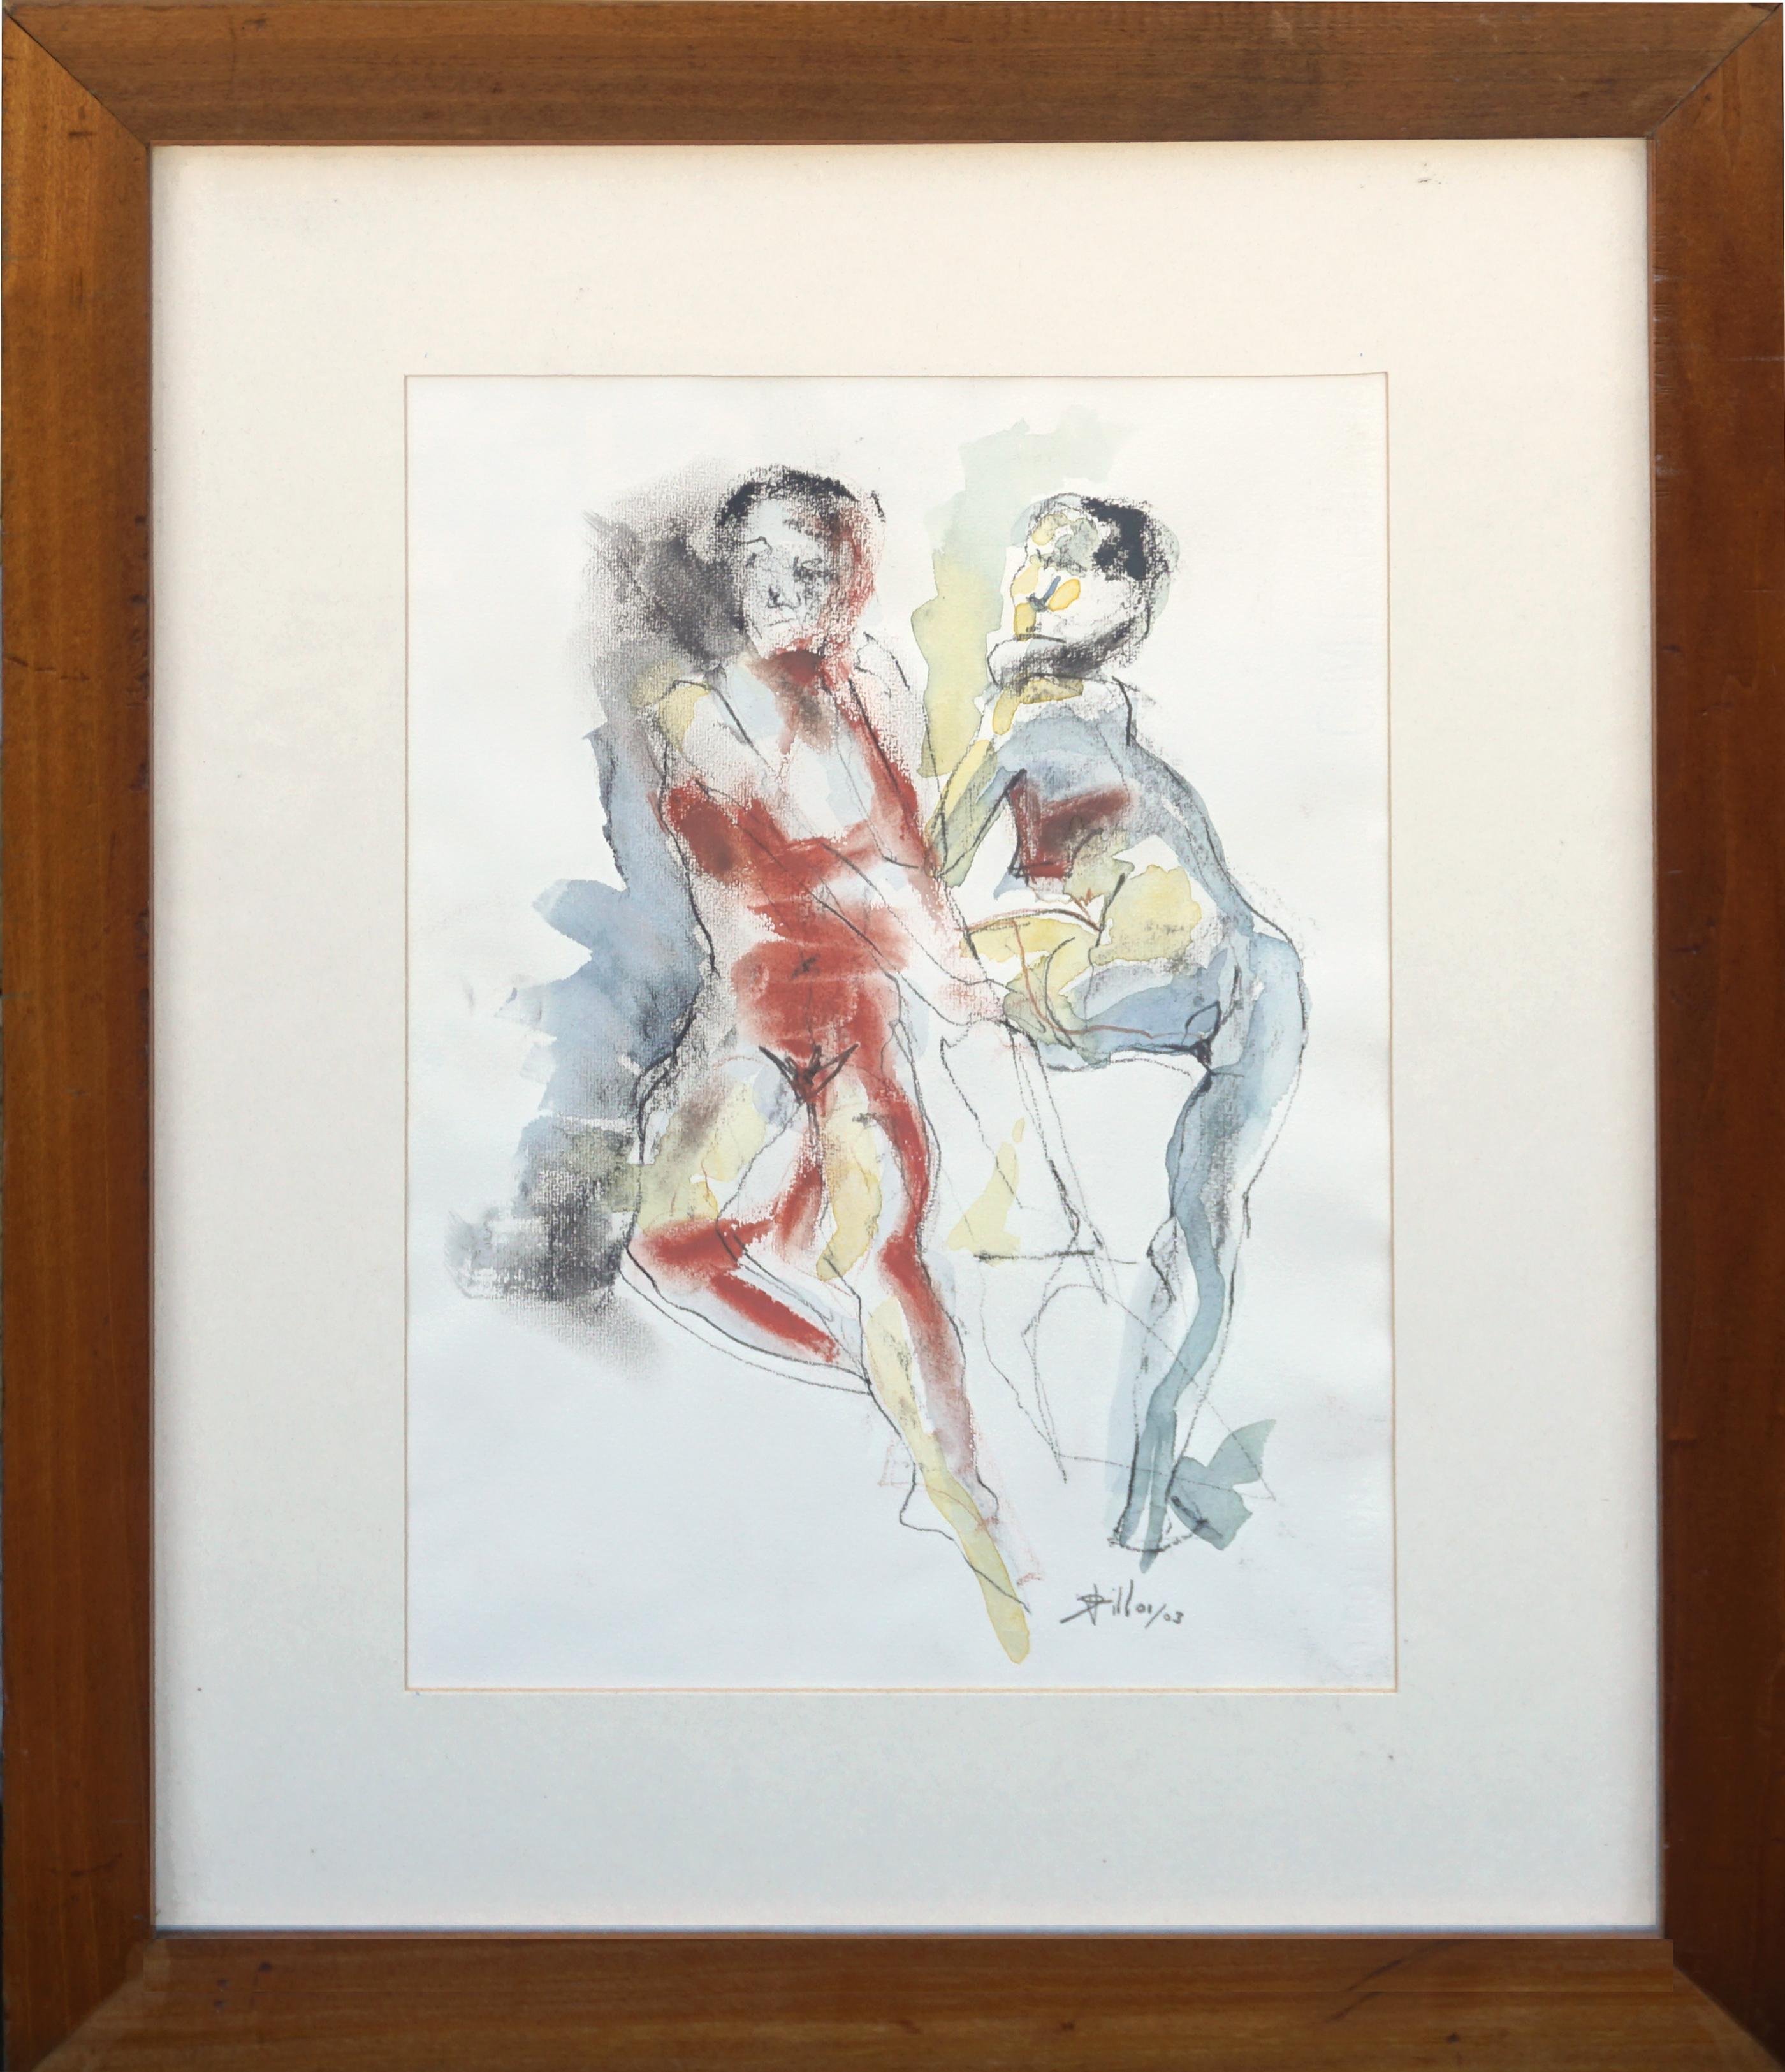 David Hill Figurative Art - Two Nude Figures - Modernist Abstract Figure Study in Red & Blue 